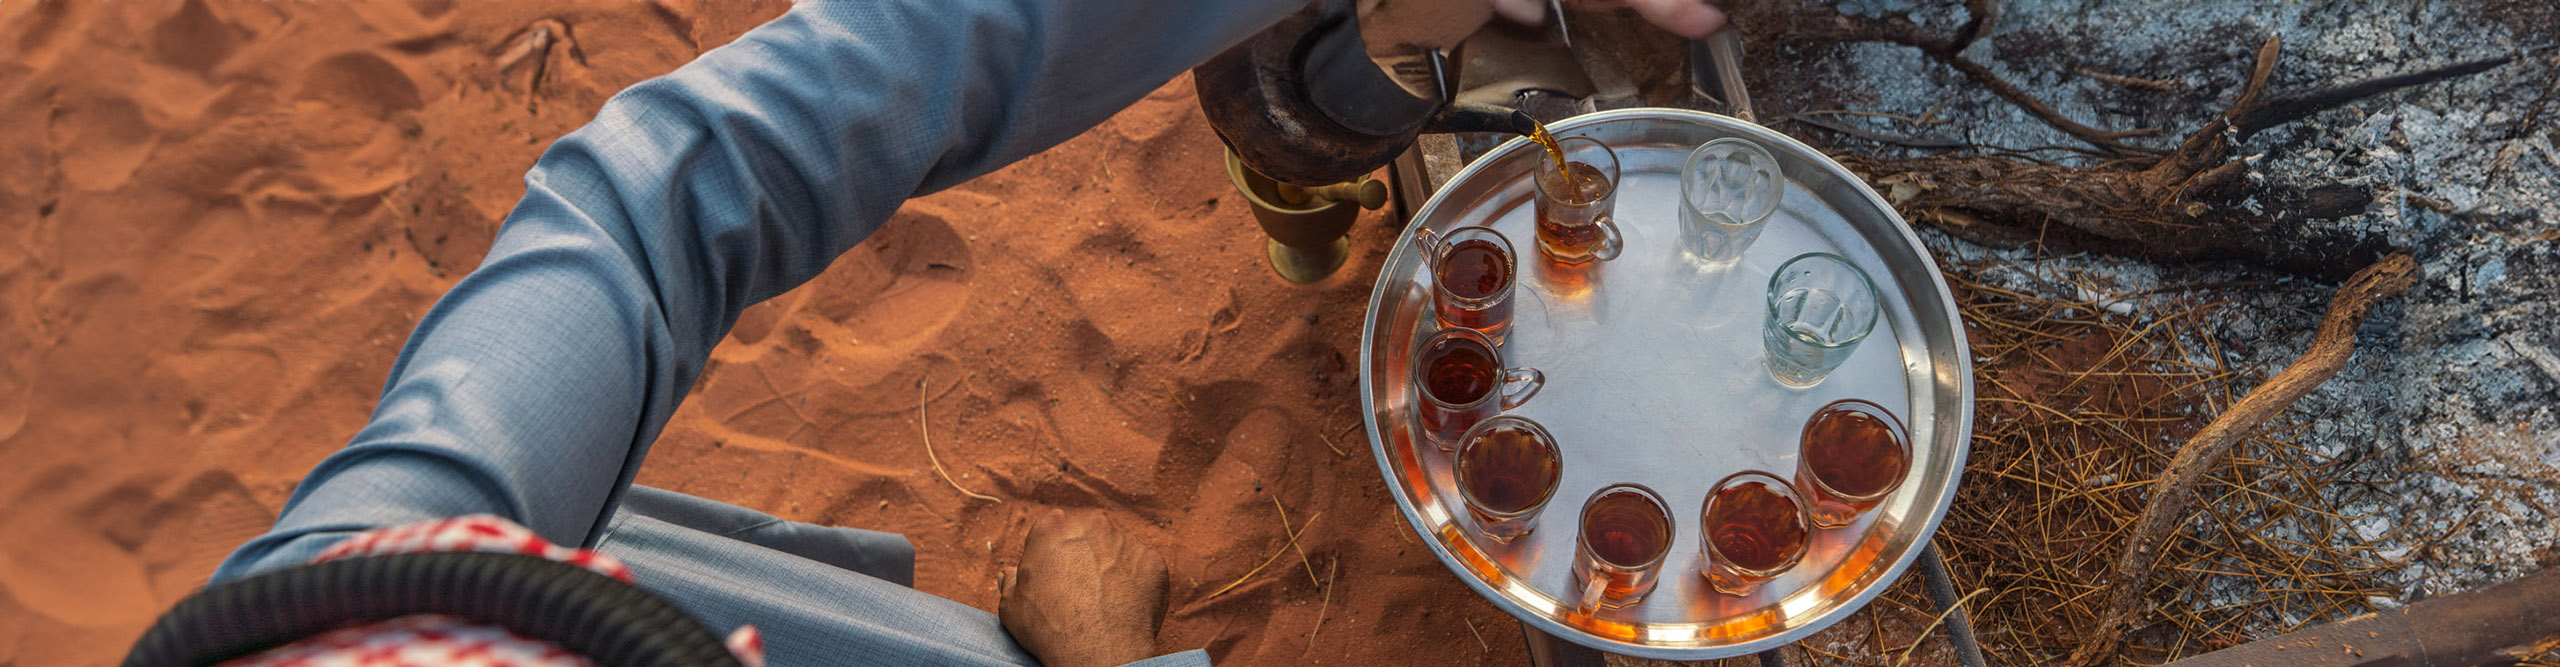 Man pouring tea into small cups in the desert for a ceremony, Jordan 